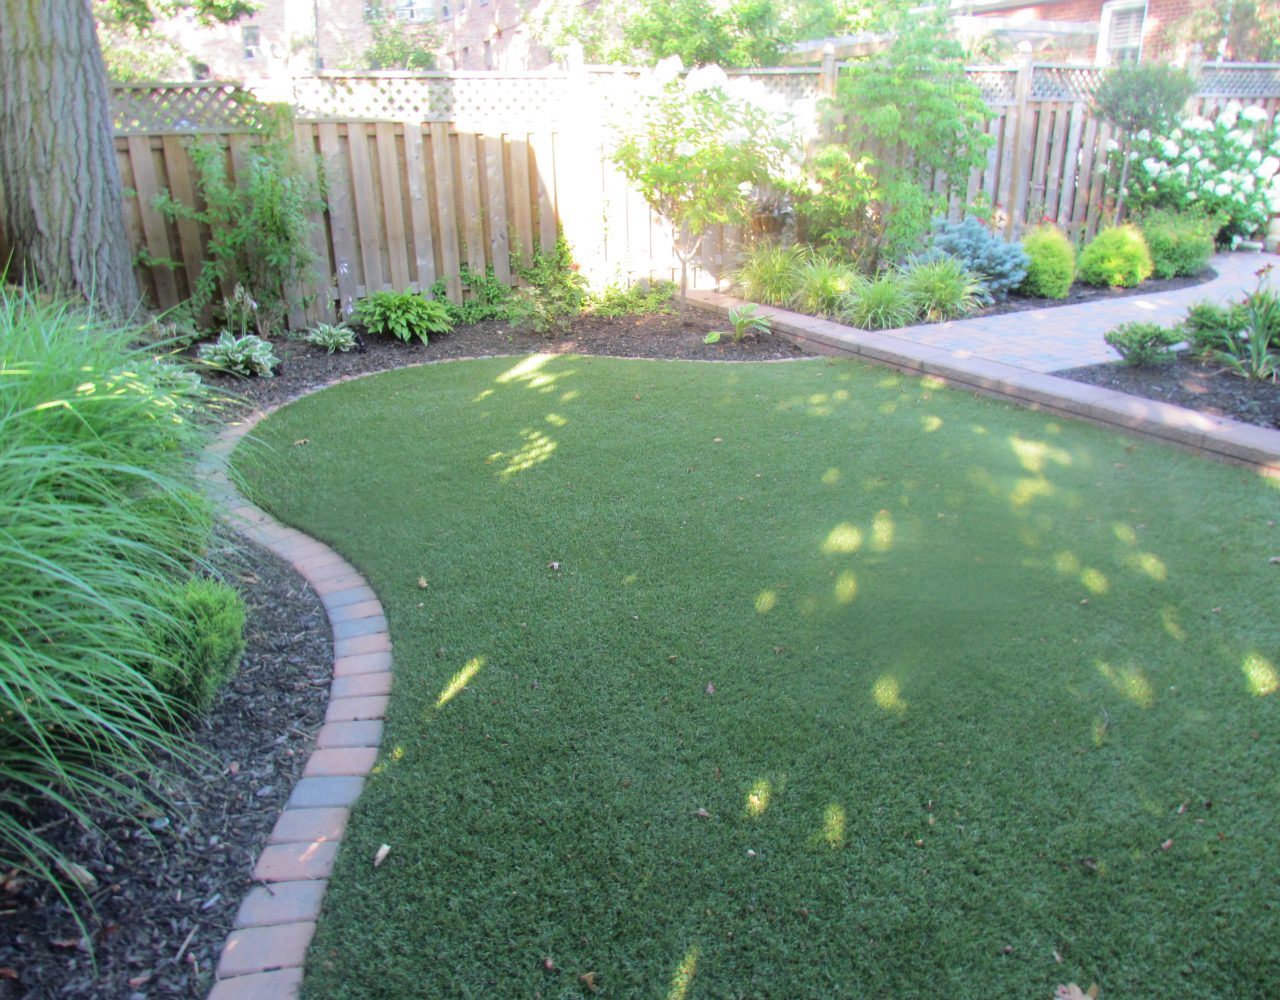 Synthetic lawn surface framed with Unilock pavers creates separation from garden